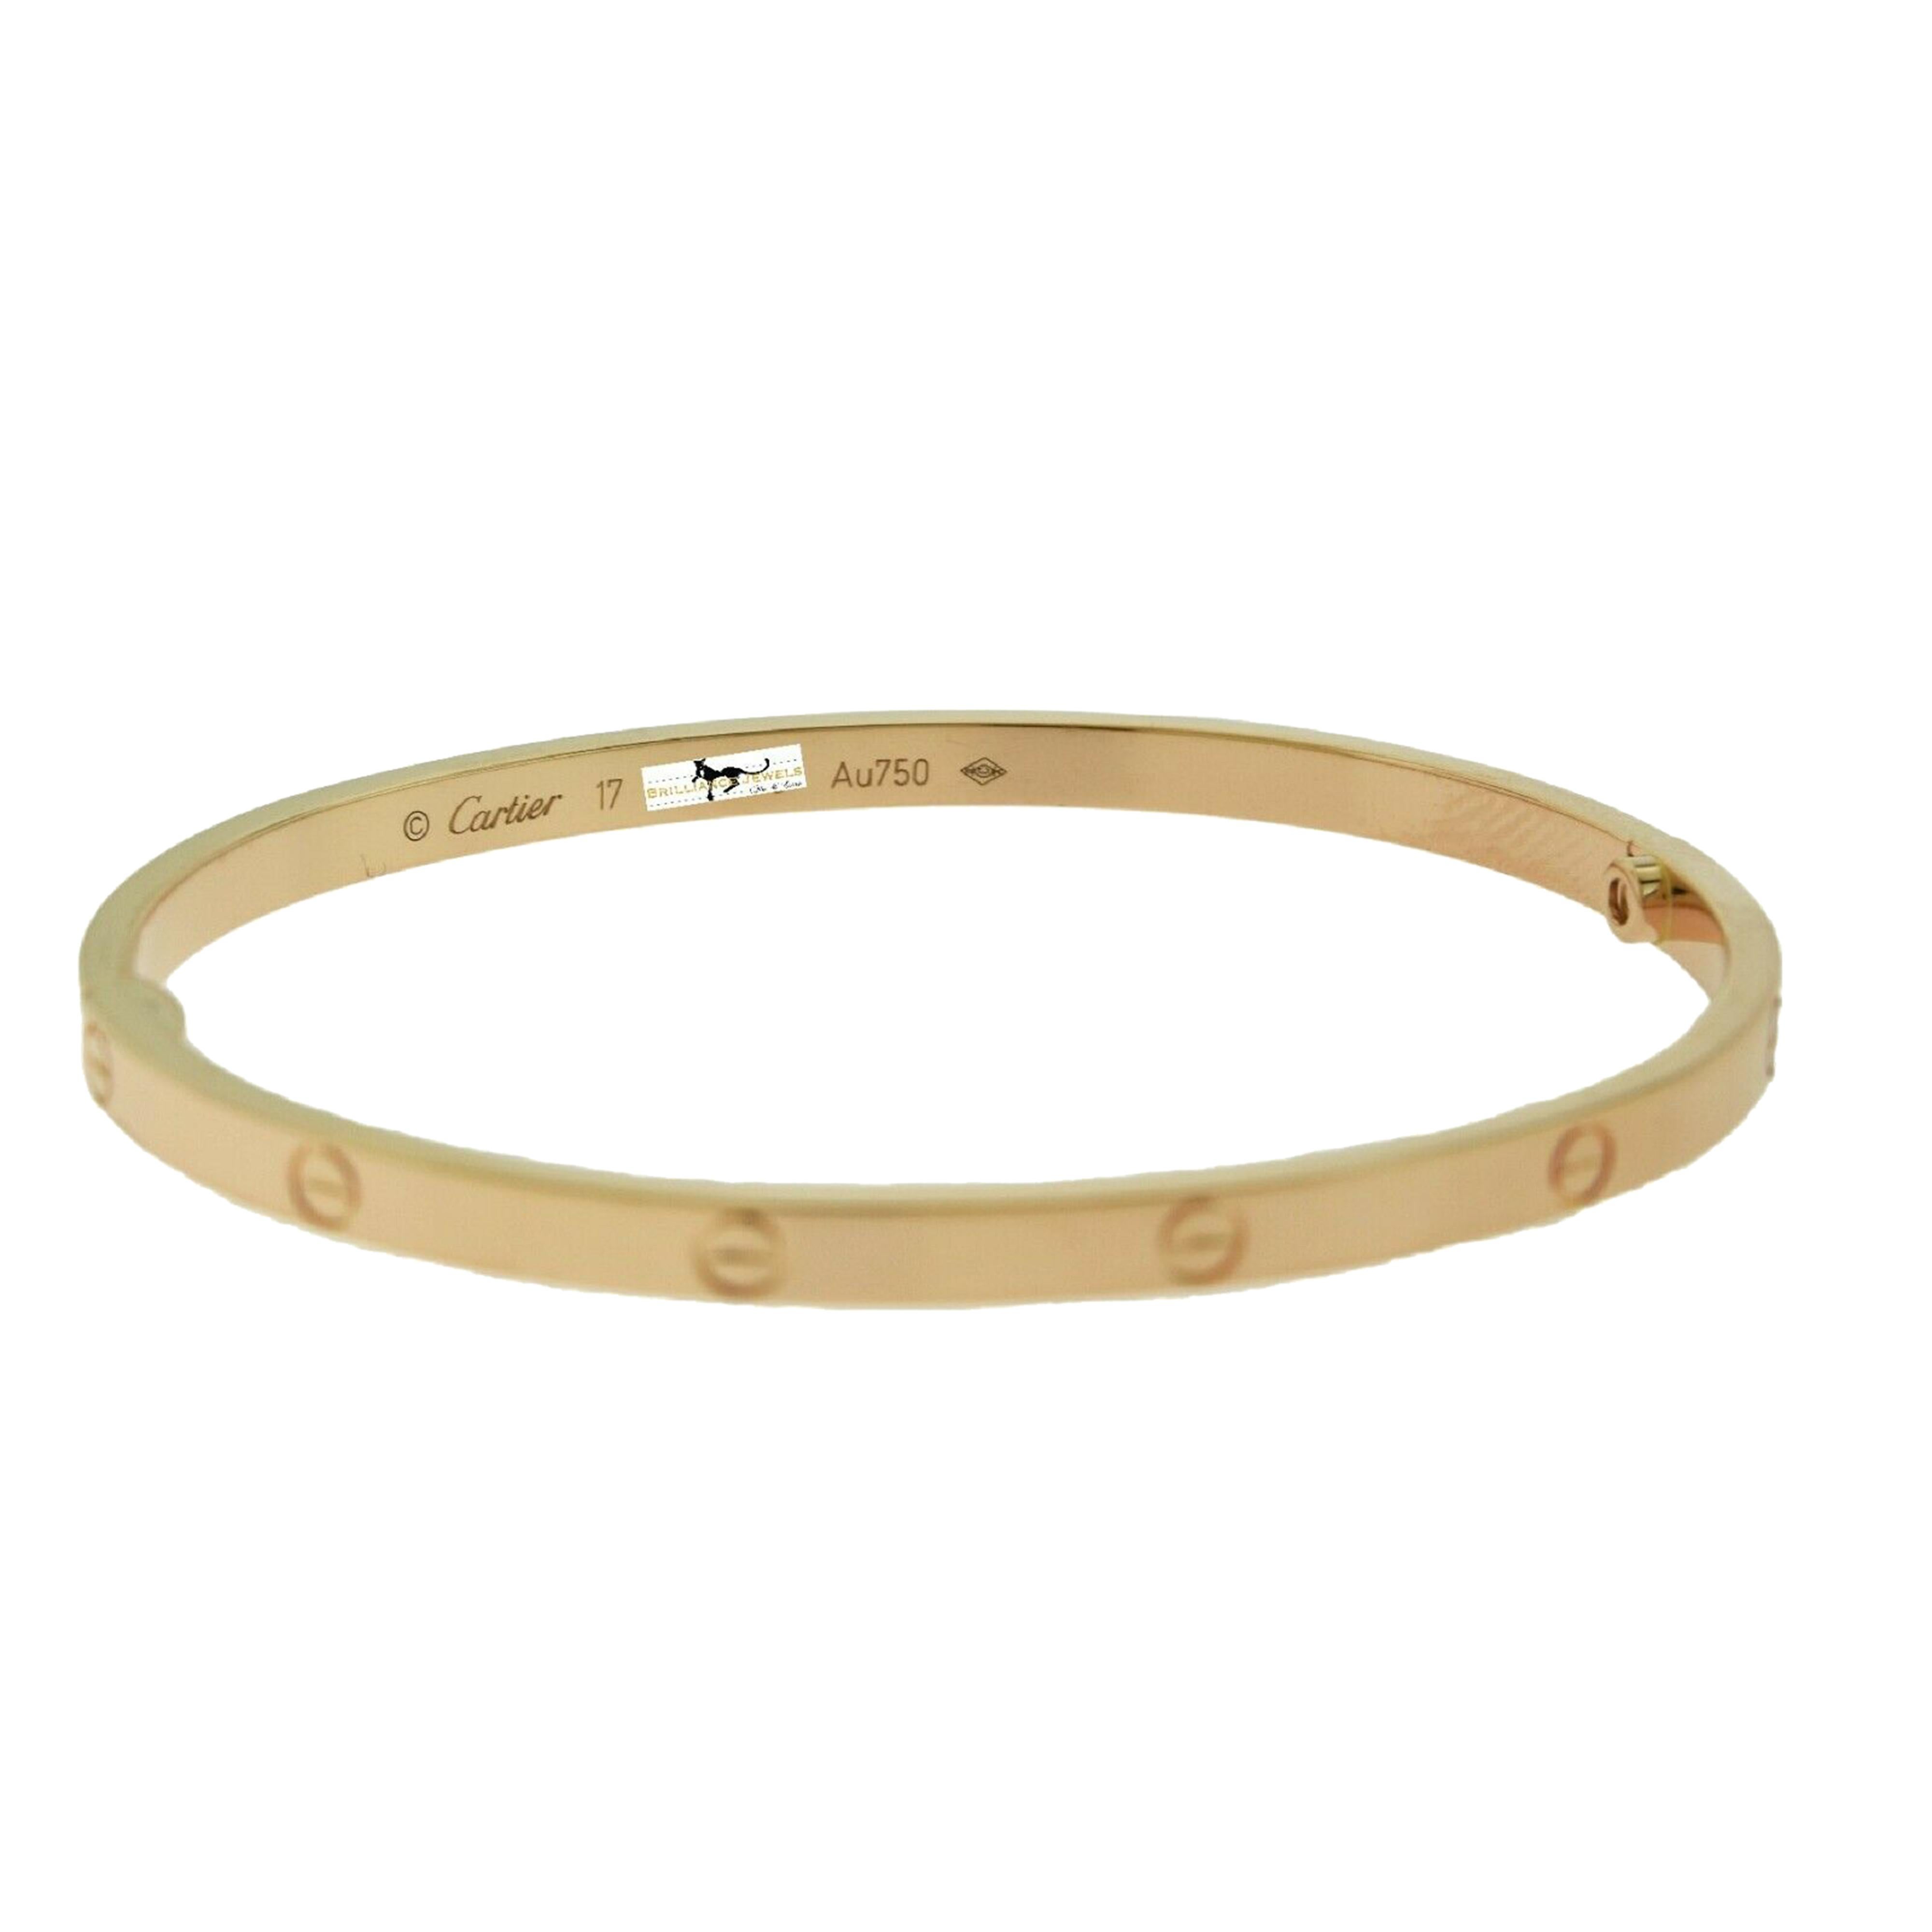 Brilliance Jewels, Miami
Questions? Call Us Anytime!
786,482,8100

Designer: Cartier

Collection: Love

Style: Thin Bracelet / Bangle

Metal: Rose Gold 

Metal Purity: 18k

Size: 17 = 17 cm​​​​​​​

Hallmarks: 17 Cartier, Serial No., AU